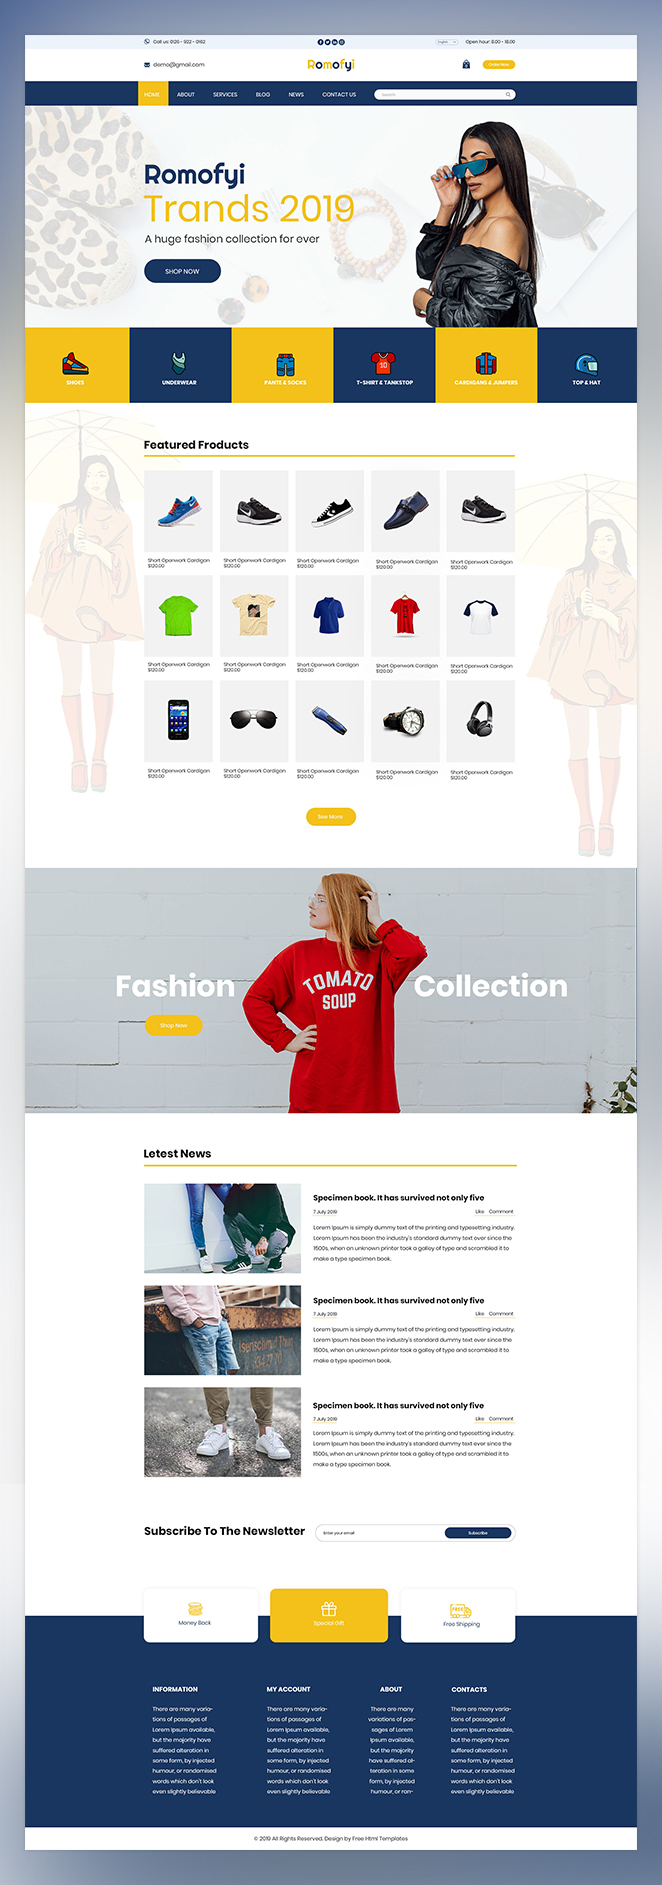 Romofyi fashion collection psd template